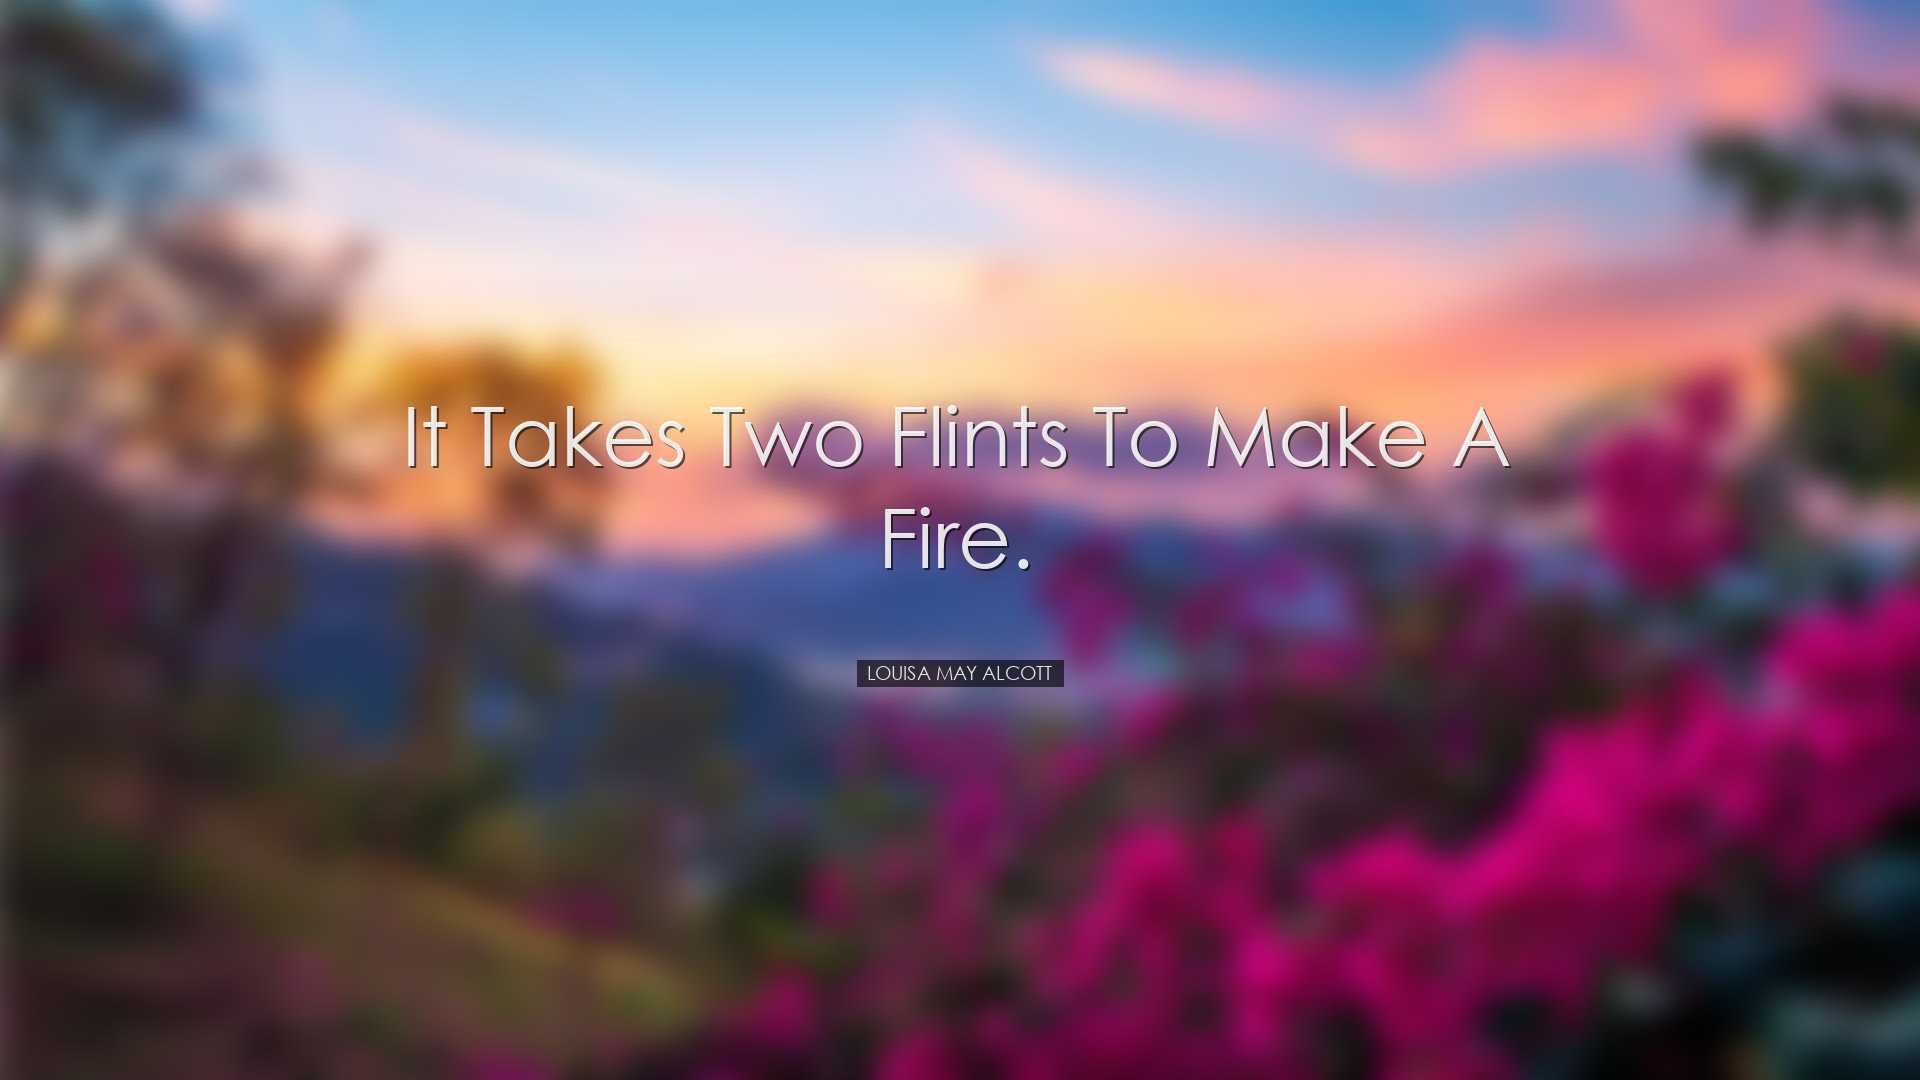 It takes two flints to make a fire. - Louisa May Alcott